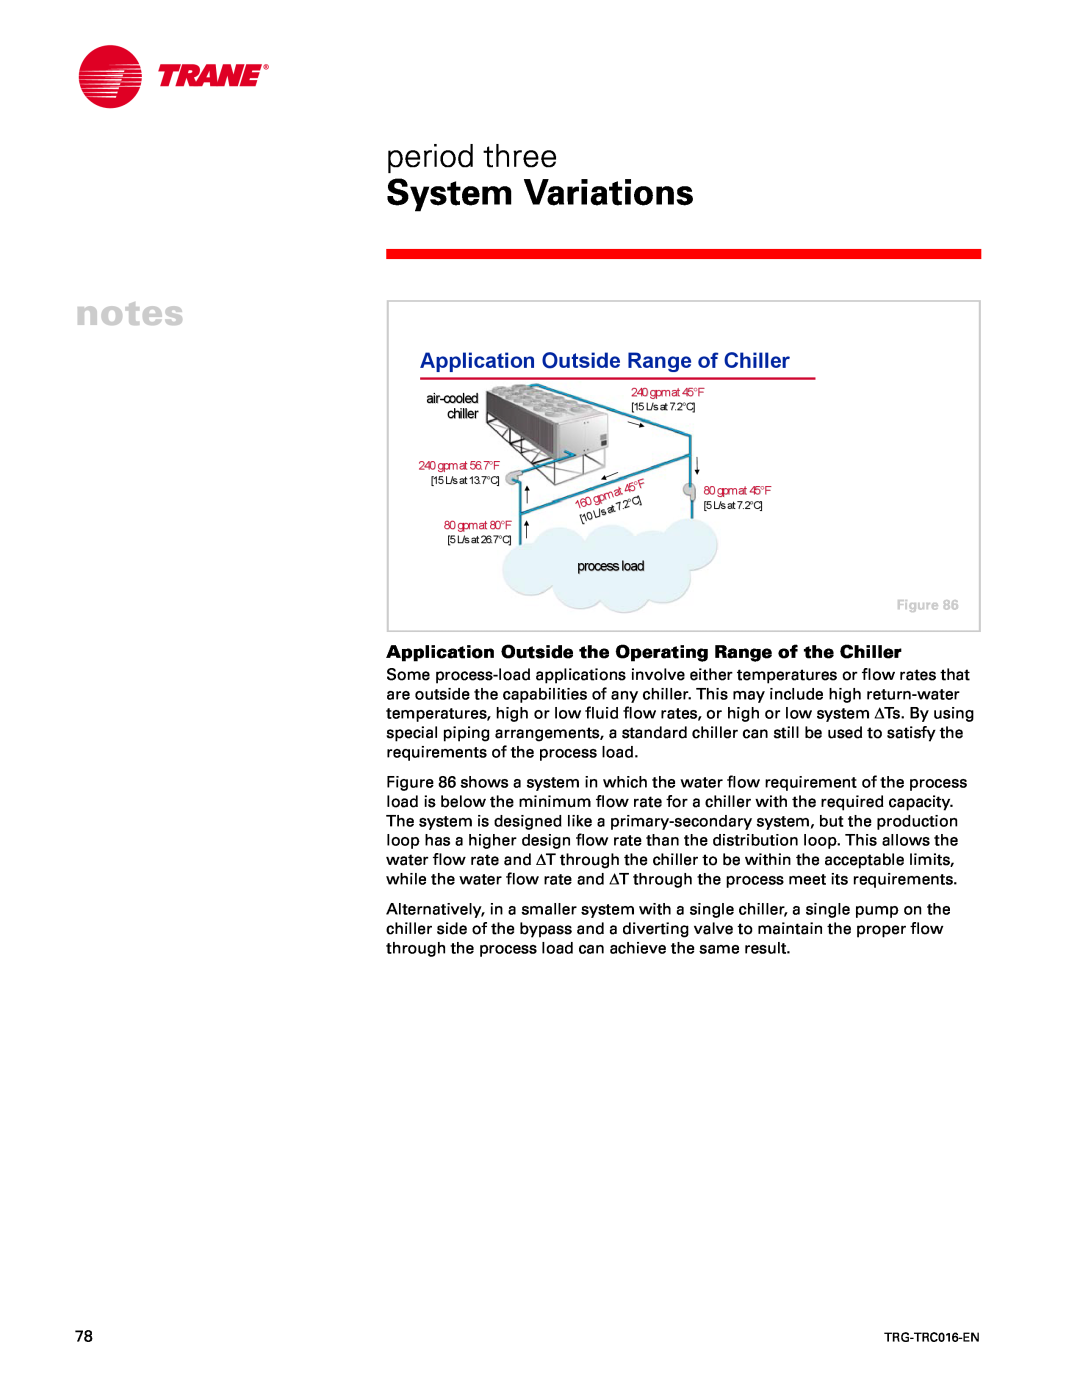 Trane TRG-TRC016-EN manual Application Outside Range of Chiller, notes, System Variations, period three, processload 